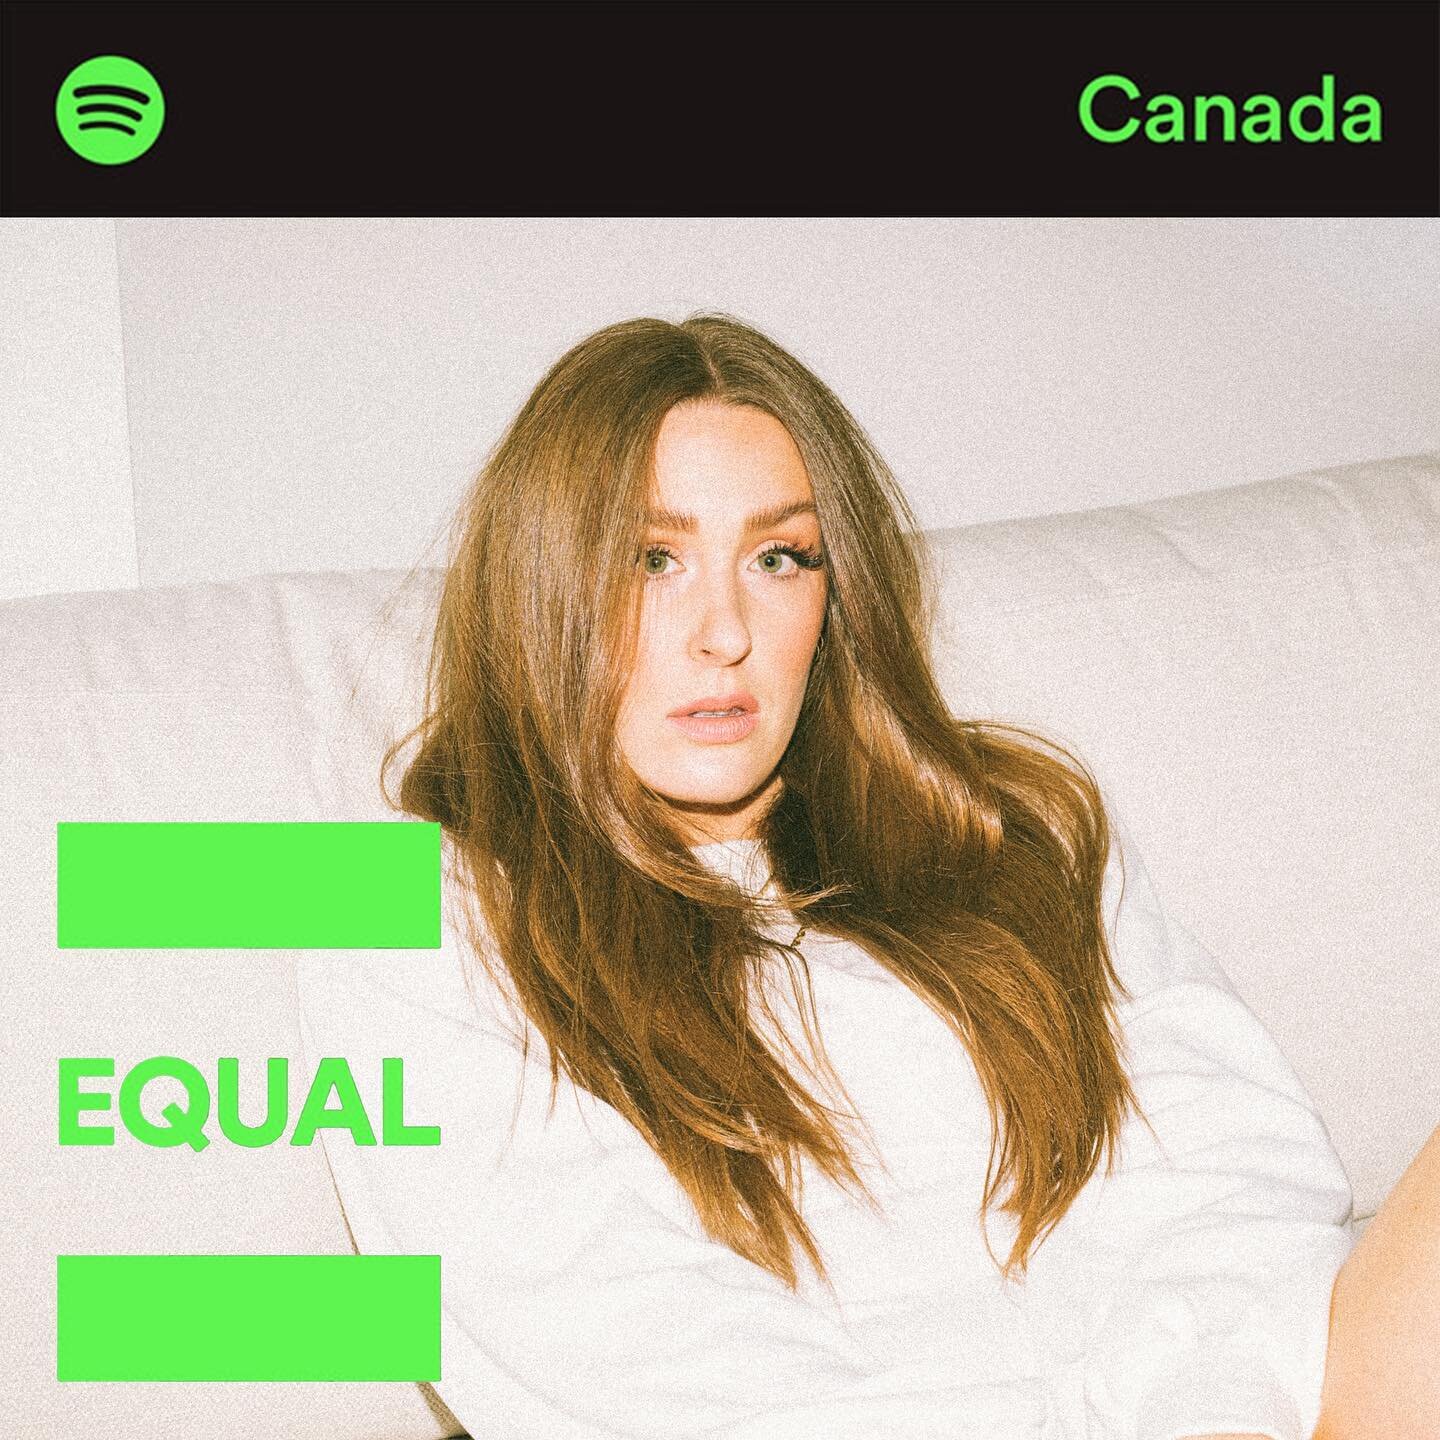 OH SHIT 🥹 I was woken up at 5am this morning by @ashoofficial super excited to tell me that &ldquo;book smart&rdquo; has been added to EQUAL Canada on @spotify 🖤 huge hugs &amp; the biggest thank u to the @spotifycanada team for adding me into this